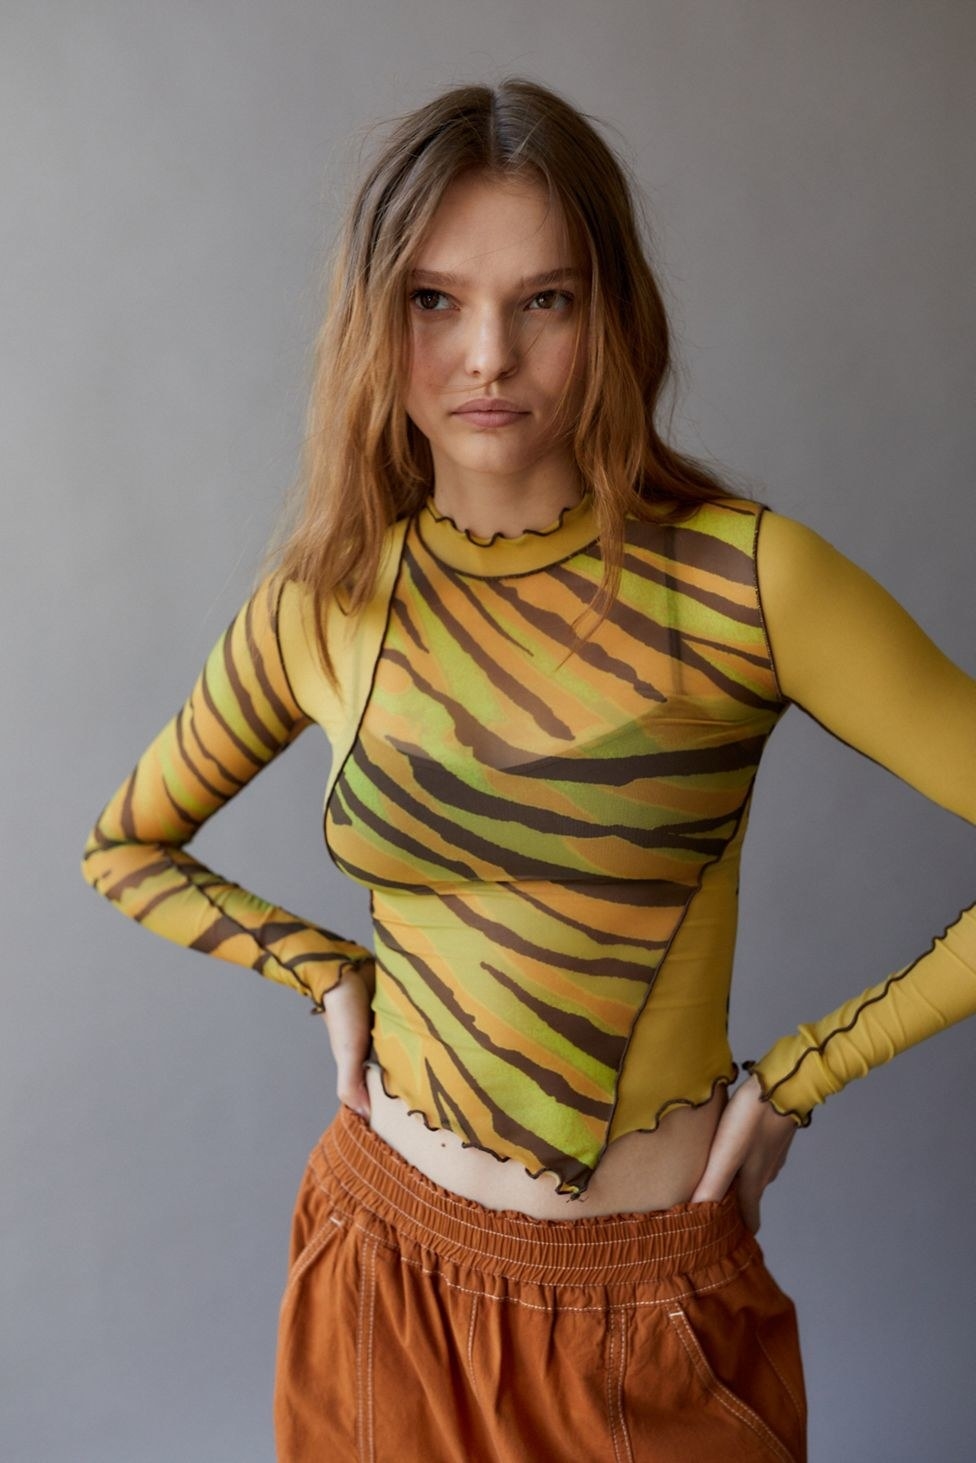 model in mesh yellow, green, orange, and brown patterned long sleeve shirt